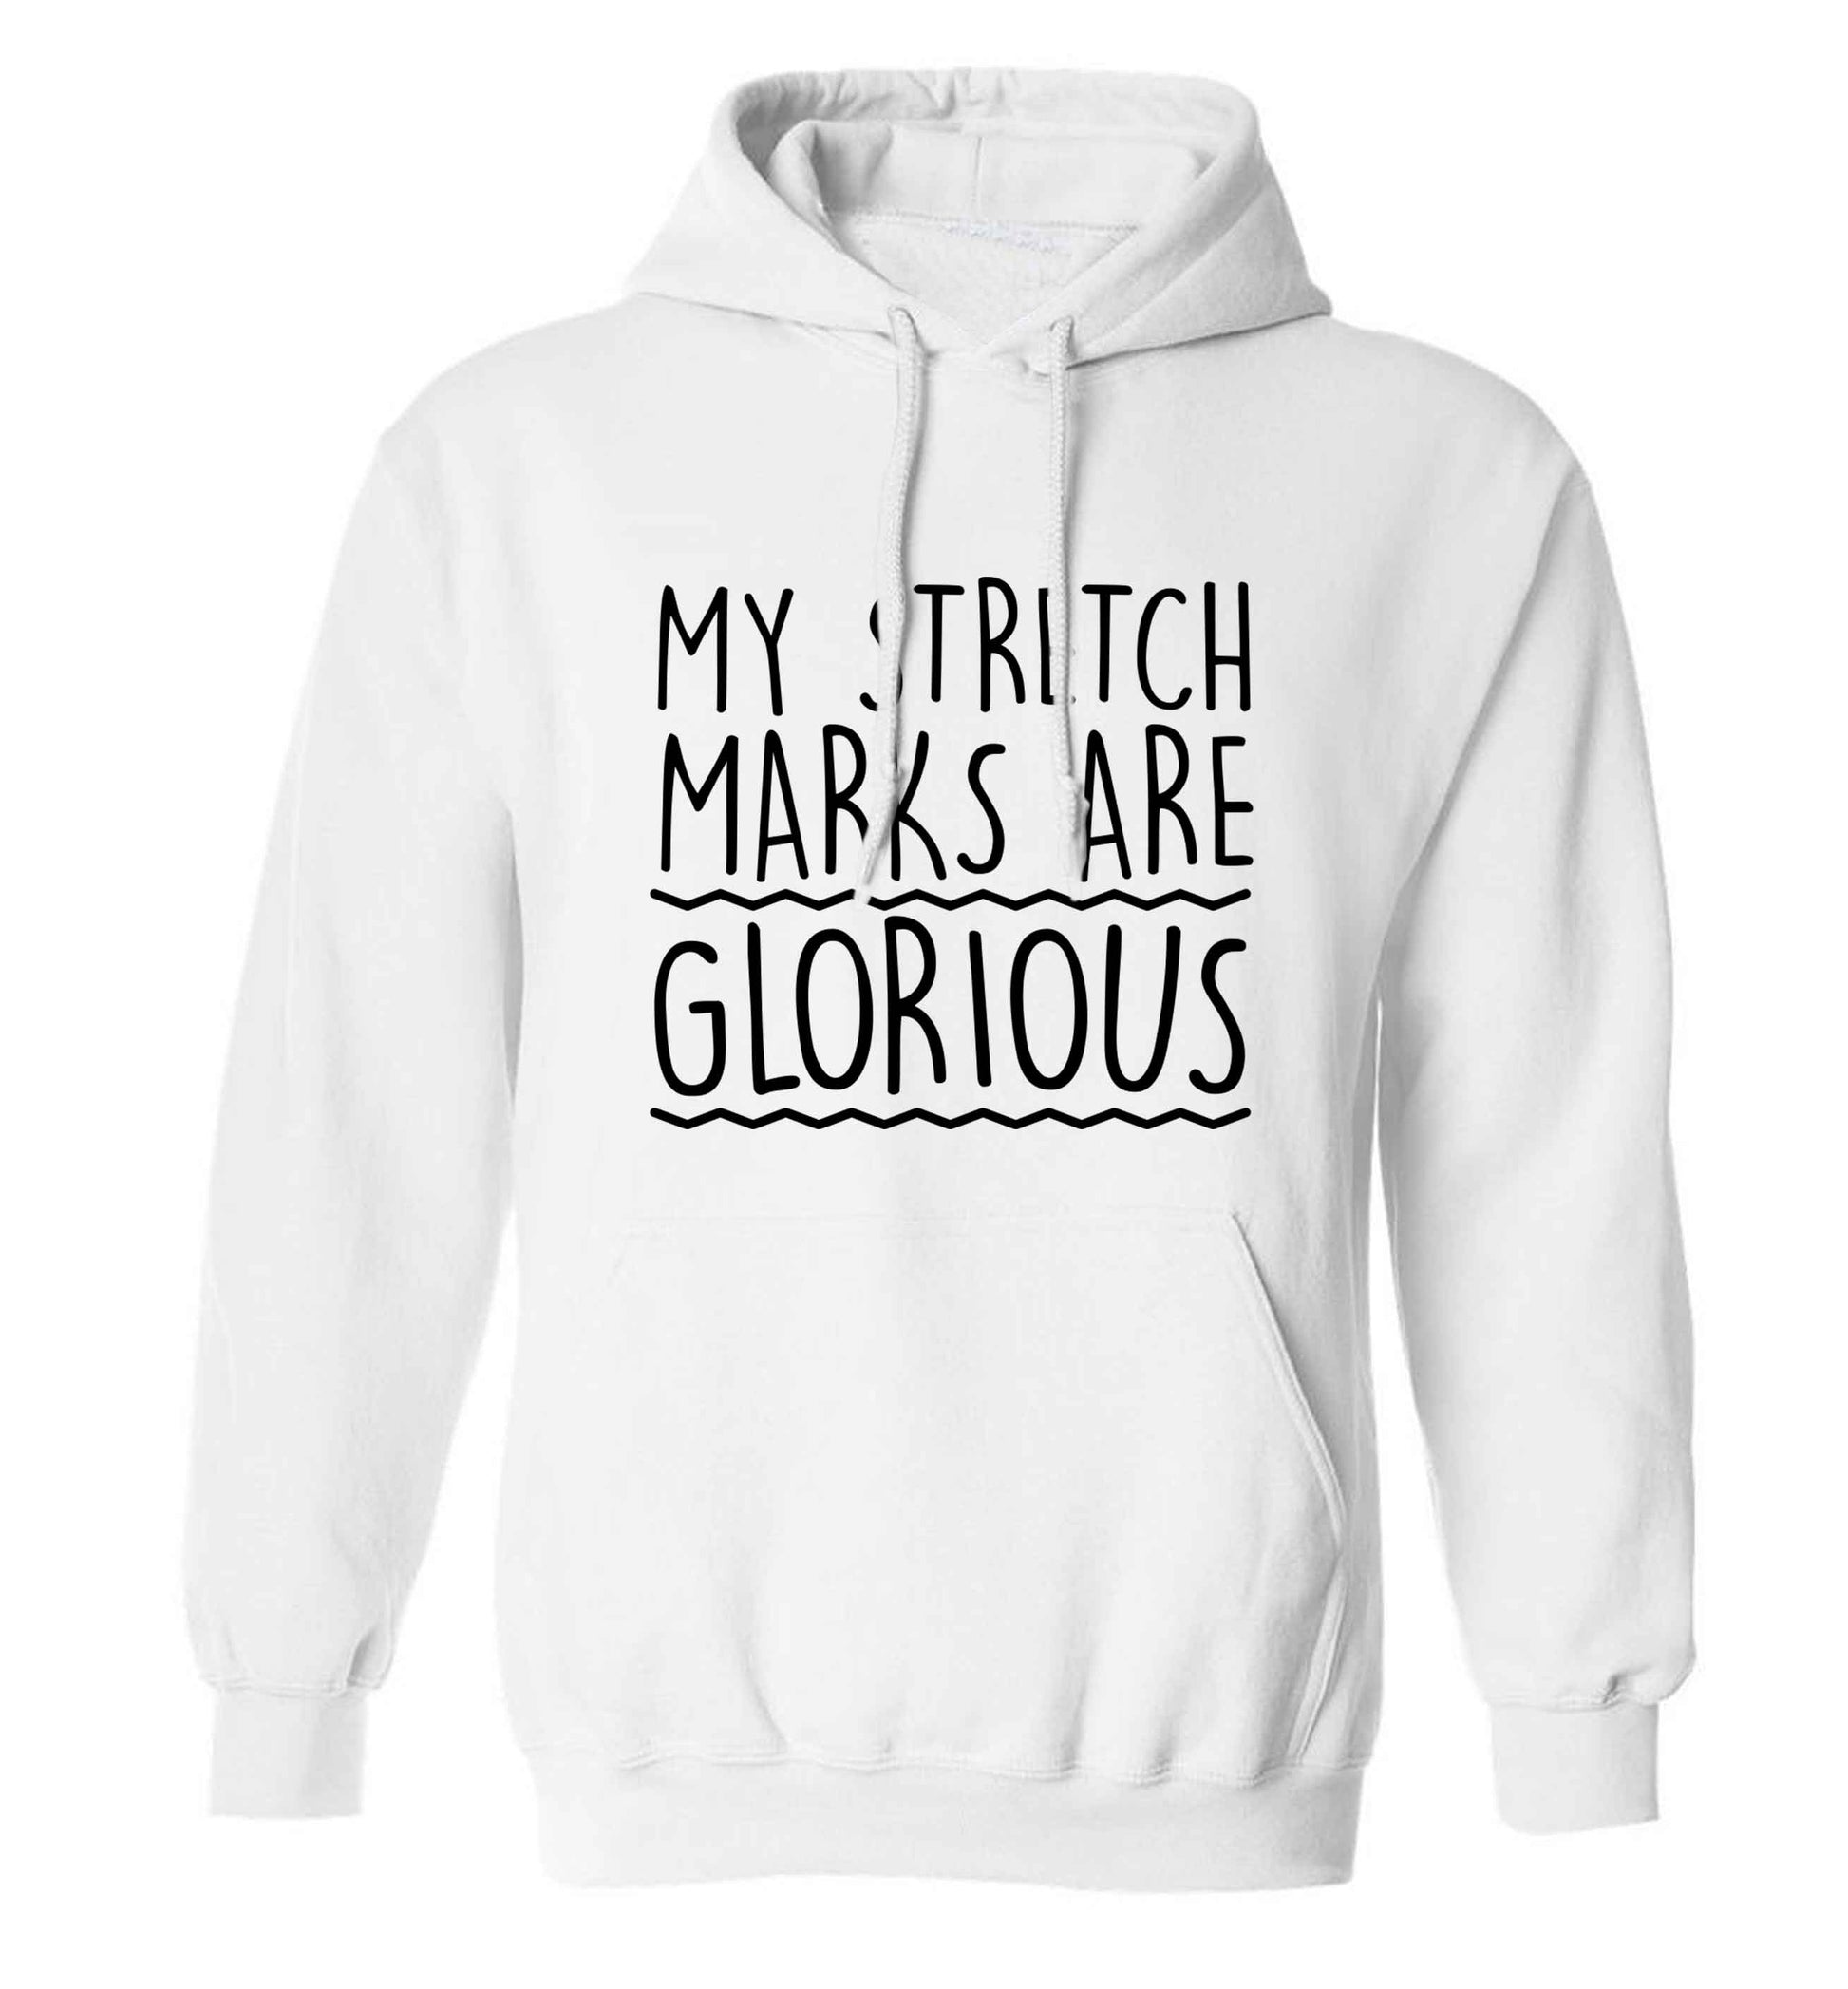 My stretch marks are glorious adults unisex white hoodie 2XL